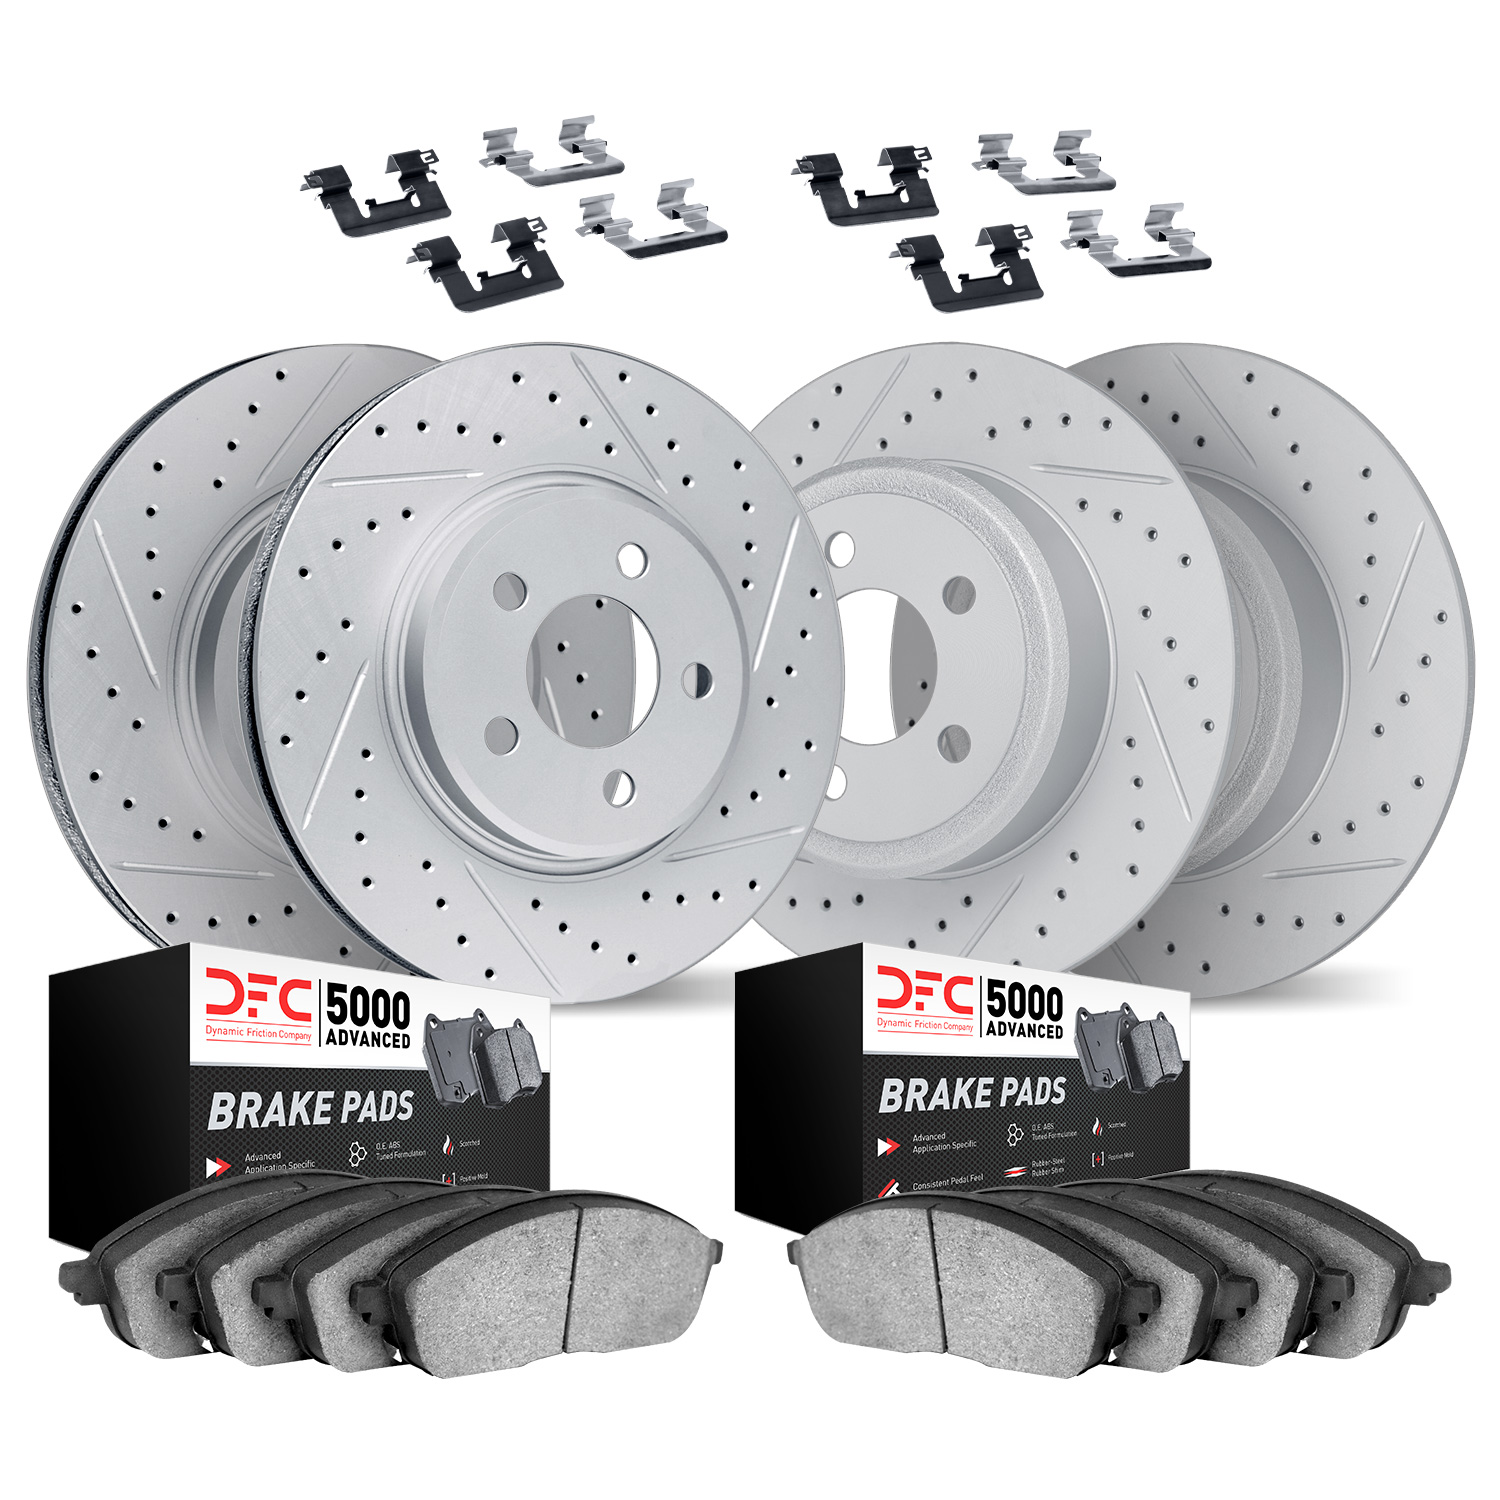 2514-59045 Geoperformance Drilled/Slotted Rotors w/5000 Advanced Brake Pads Kit & Hardware, 2018-2020 Acura/Honda, Position: Fro